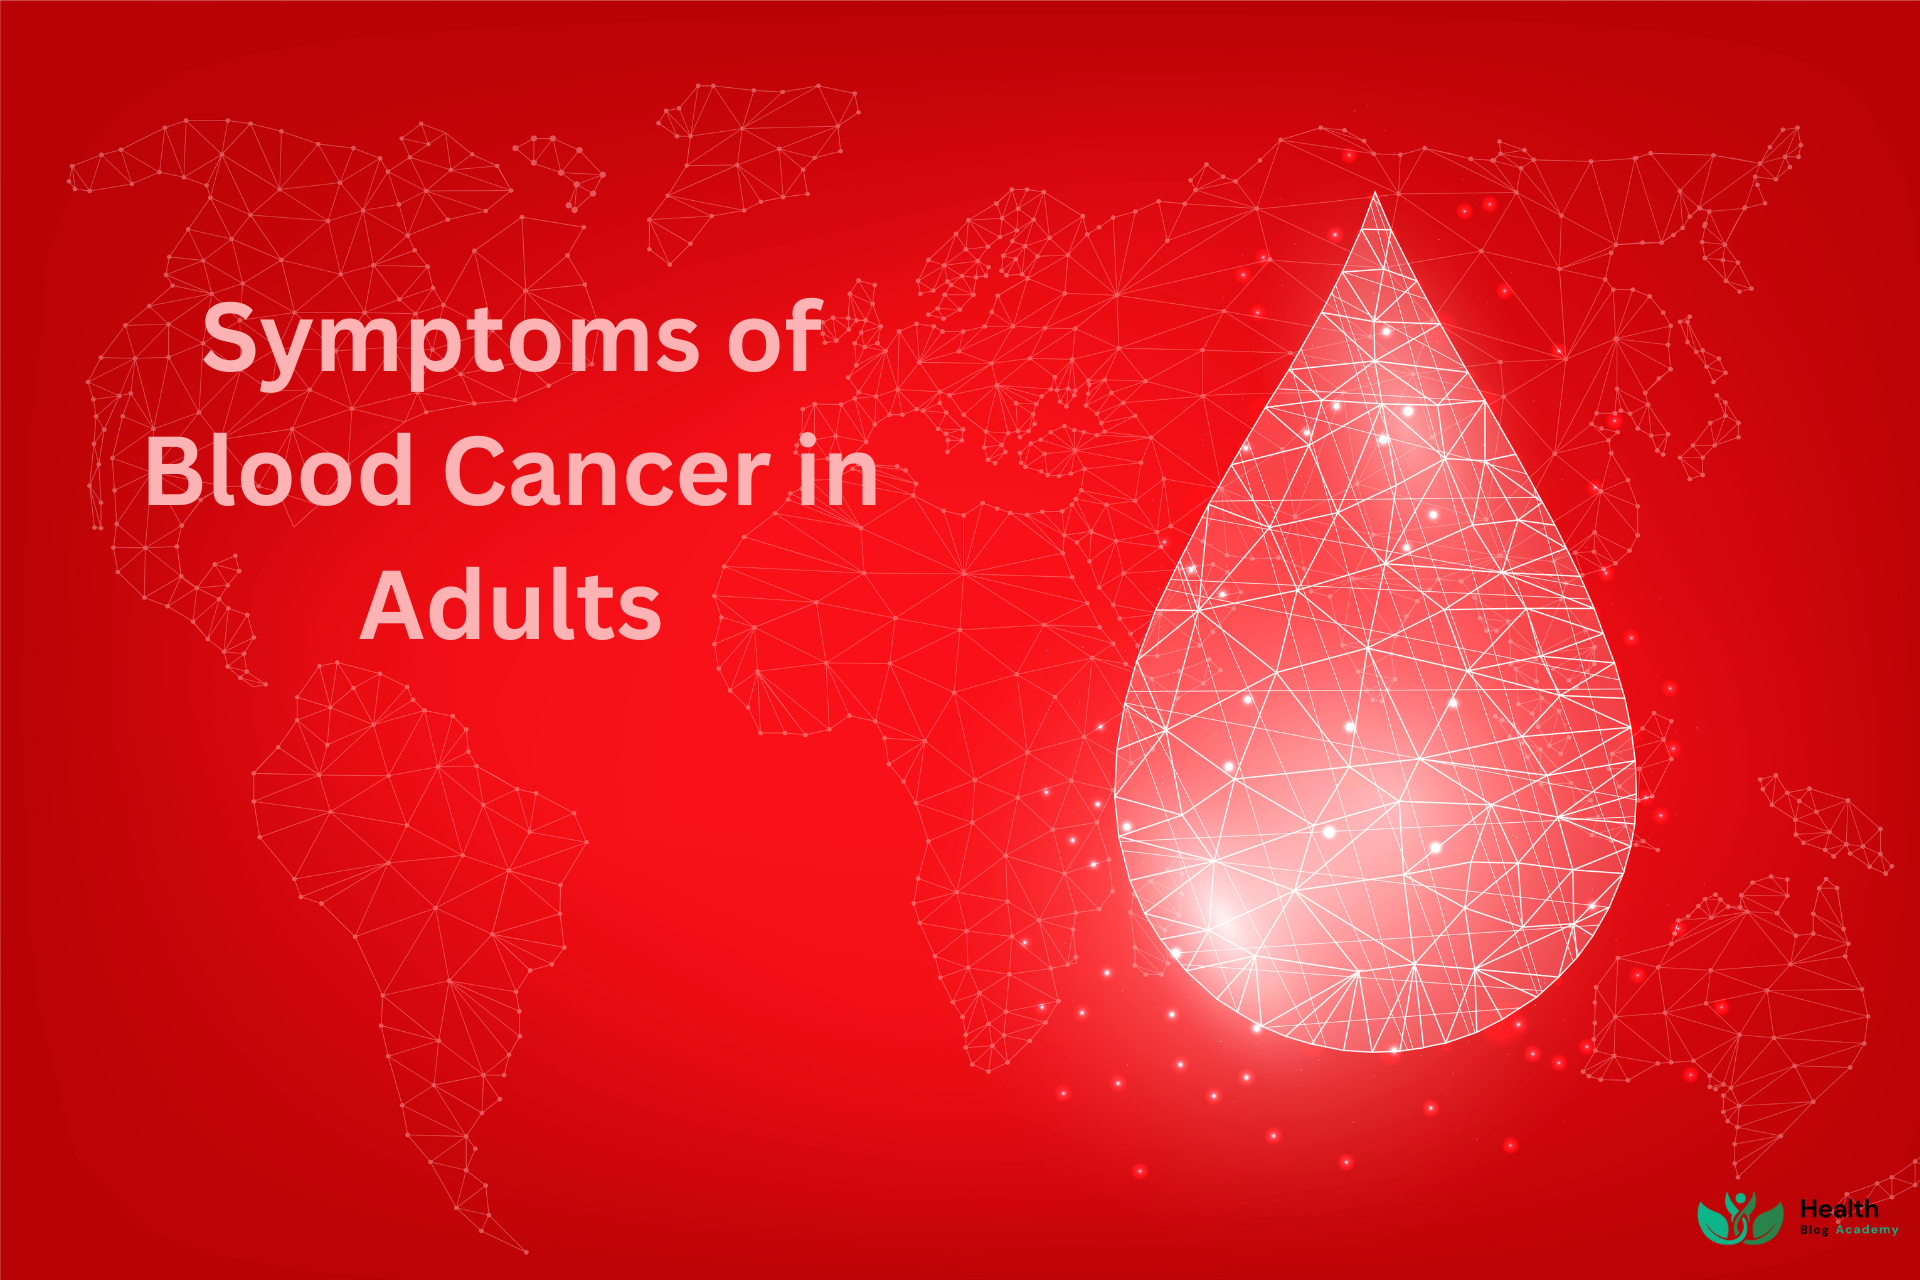 Symptoms of Blood Cancer in Adults